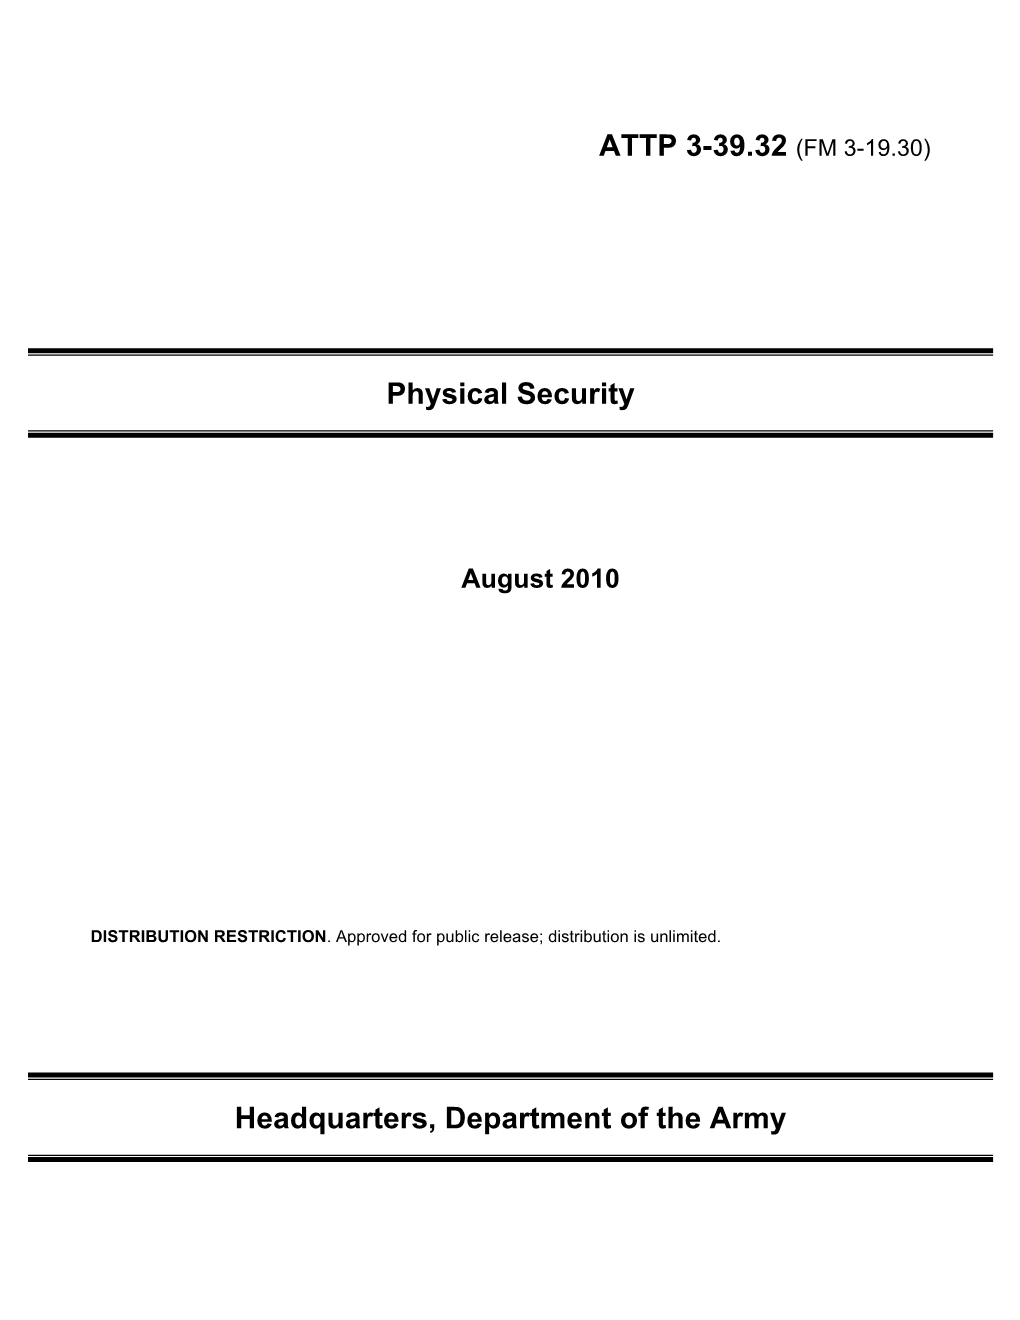 ATTP 3-39.32 (FM 3-19.30) Physical Security